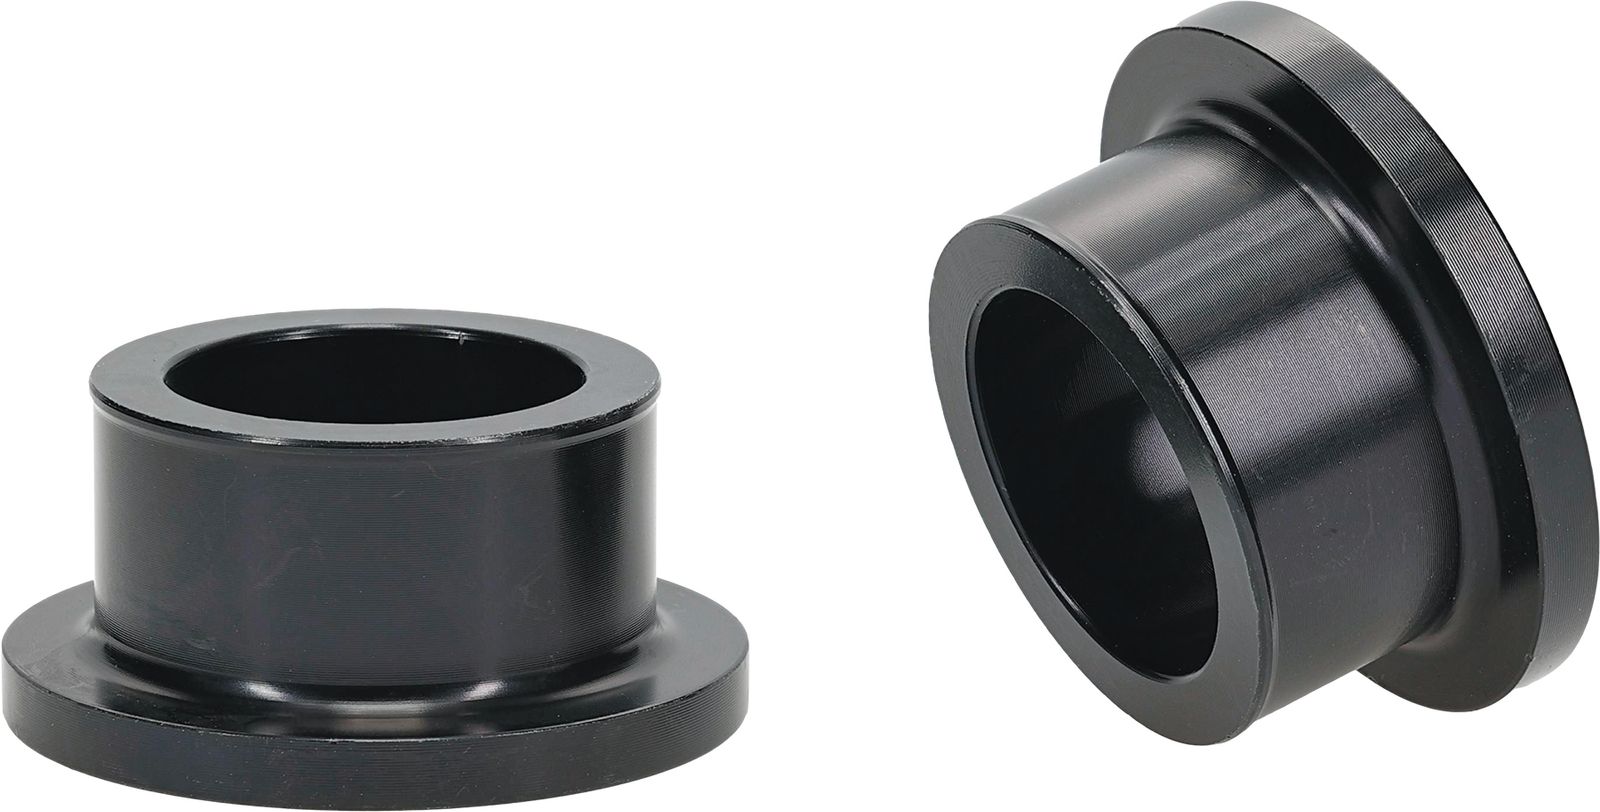 Wrp Rear Wheel Spacer Kits - WRP111081-1 image